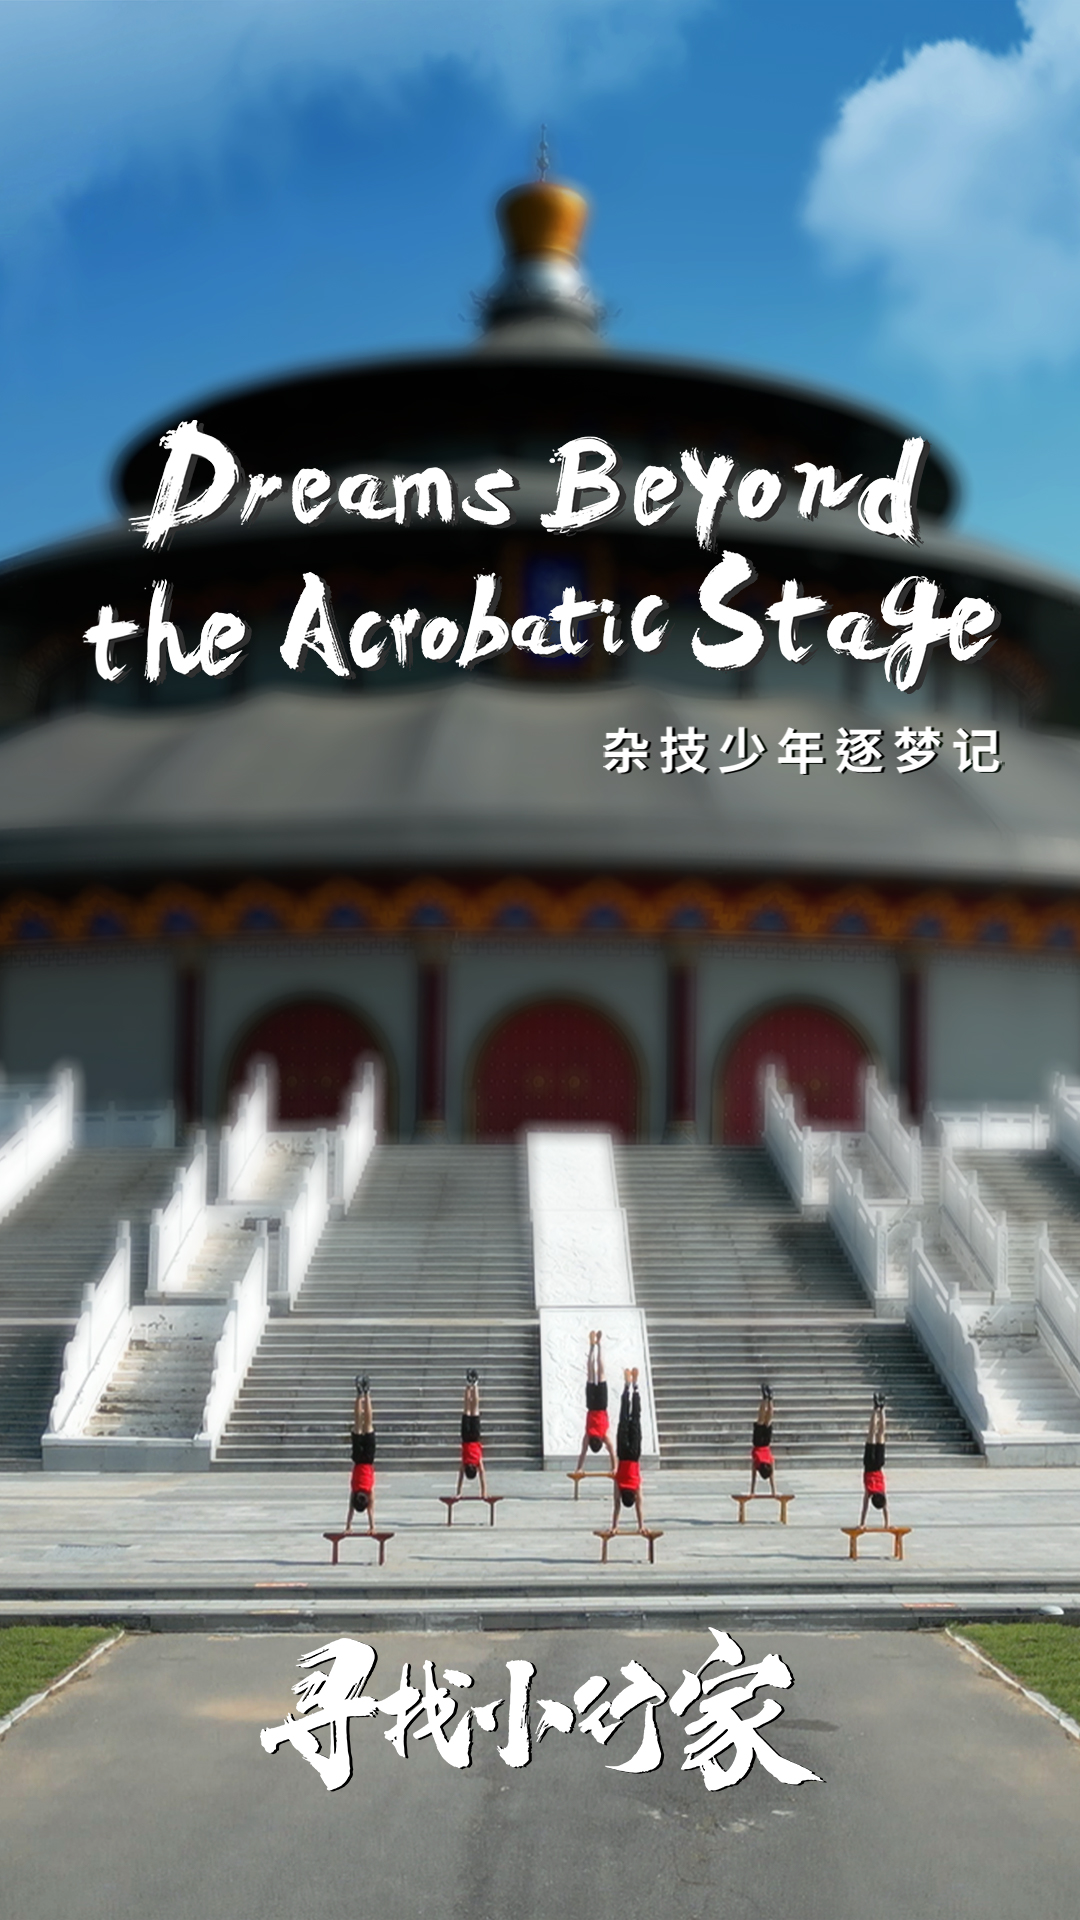 Dreams beyond the acrobatic stage